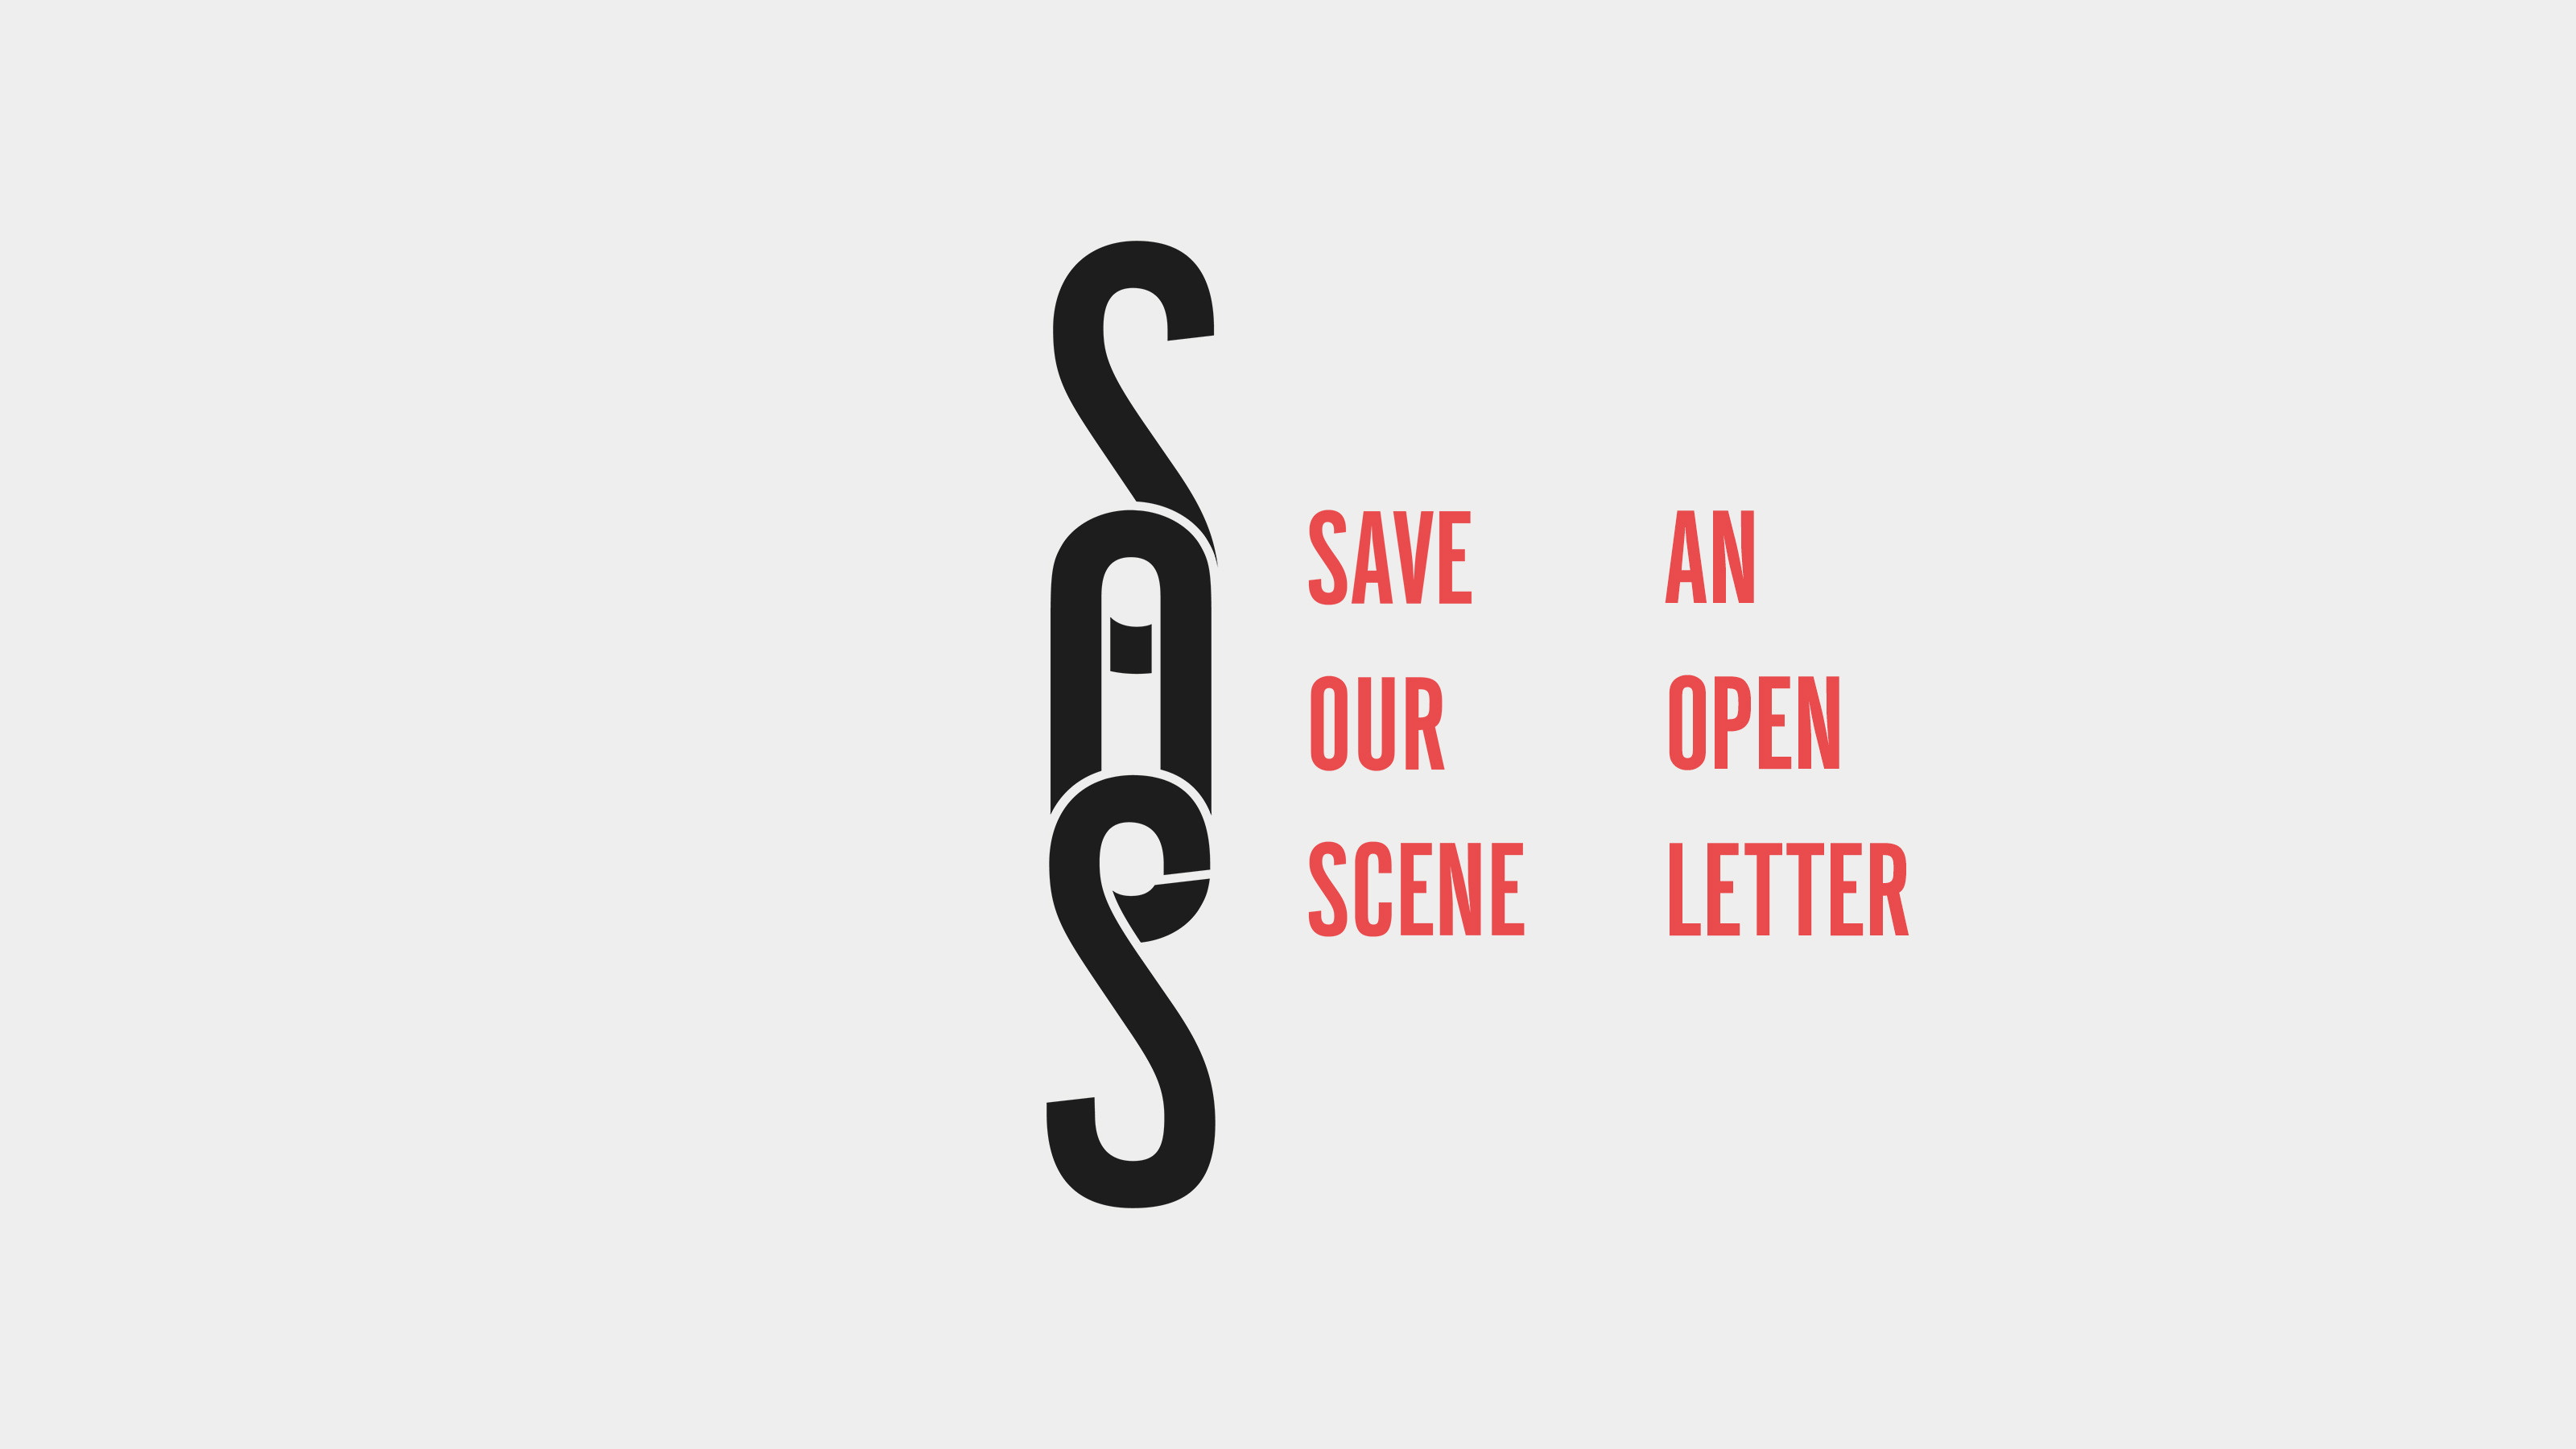 Save Our Scene: An Open Letter